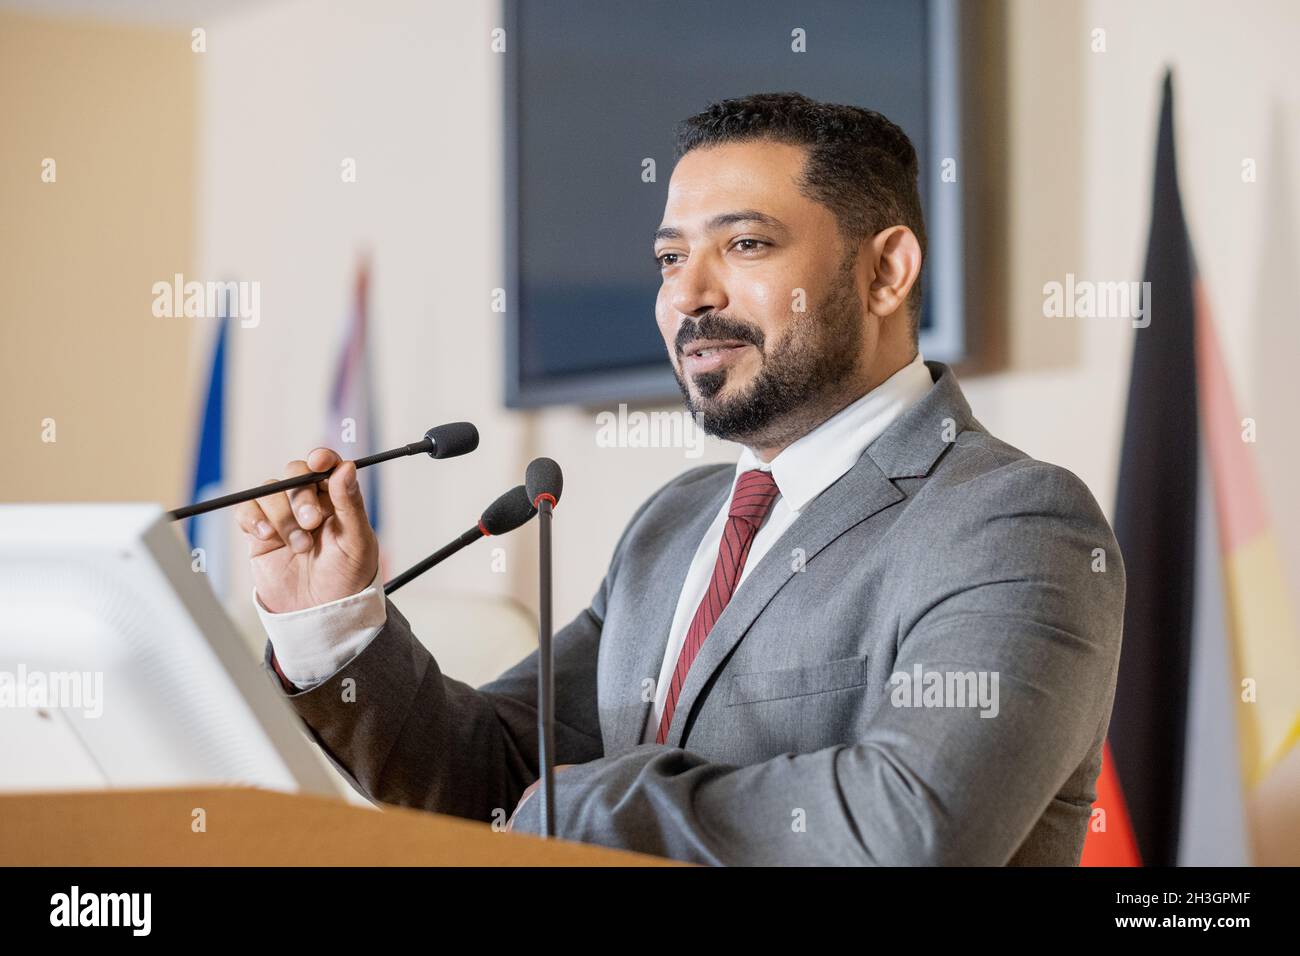 Content confident Middle Eastern politician in gray suit standing at tribune podium and speaking into microphone while presenting report at conference Stock Photo